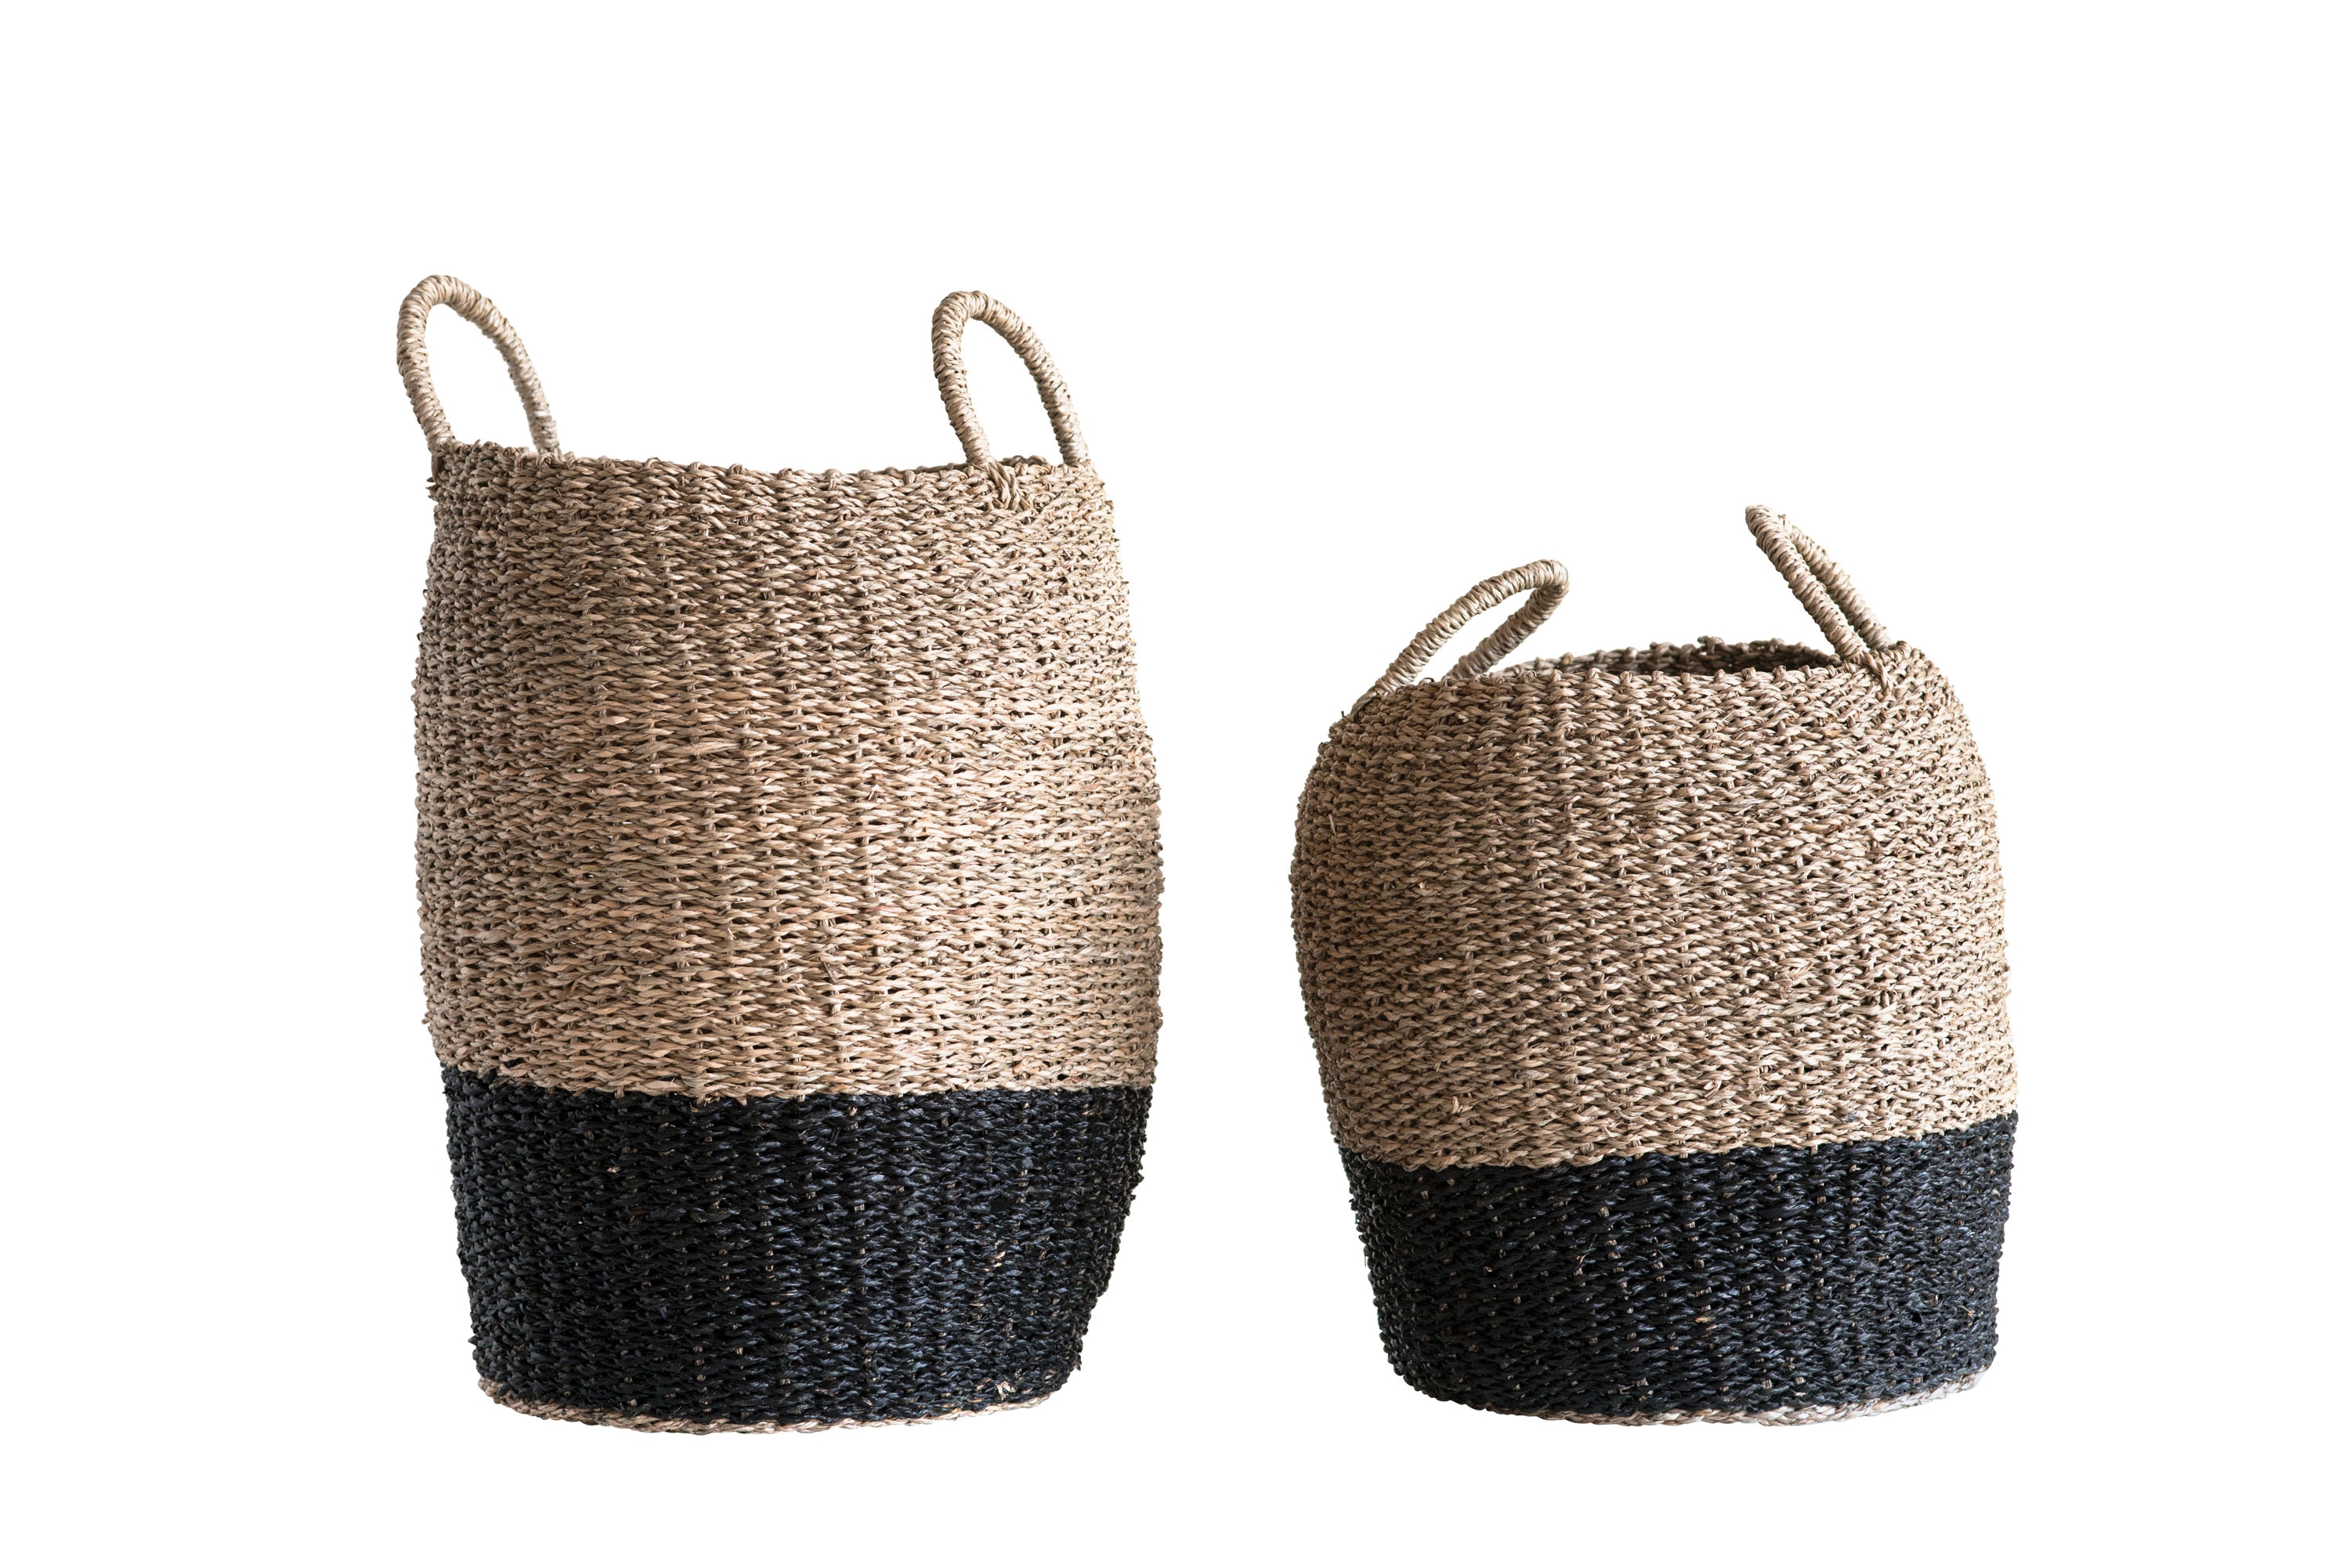 Brown & Black Woven Seagrass Baskets with Handles (Set of 2 Sizes) - Image 0